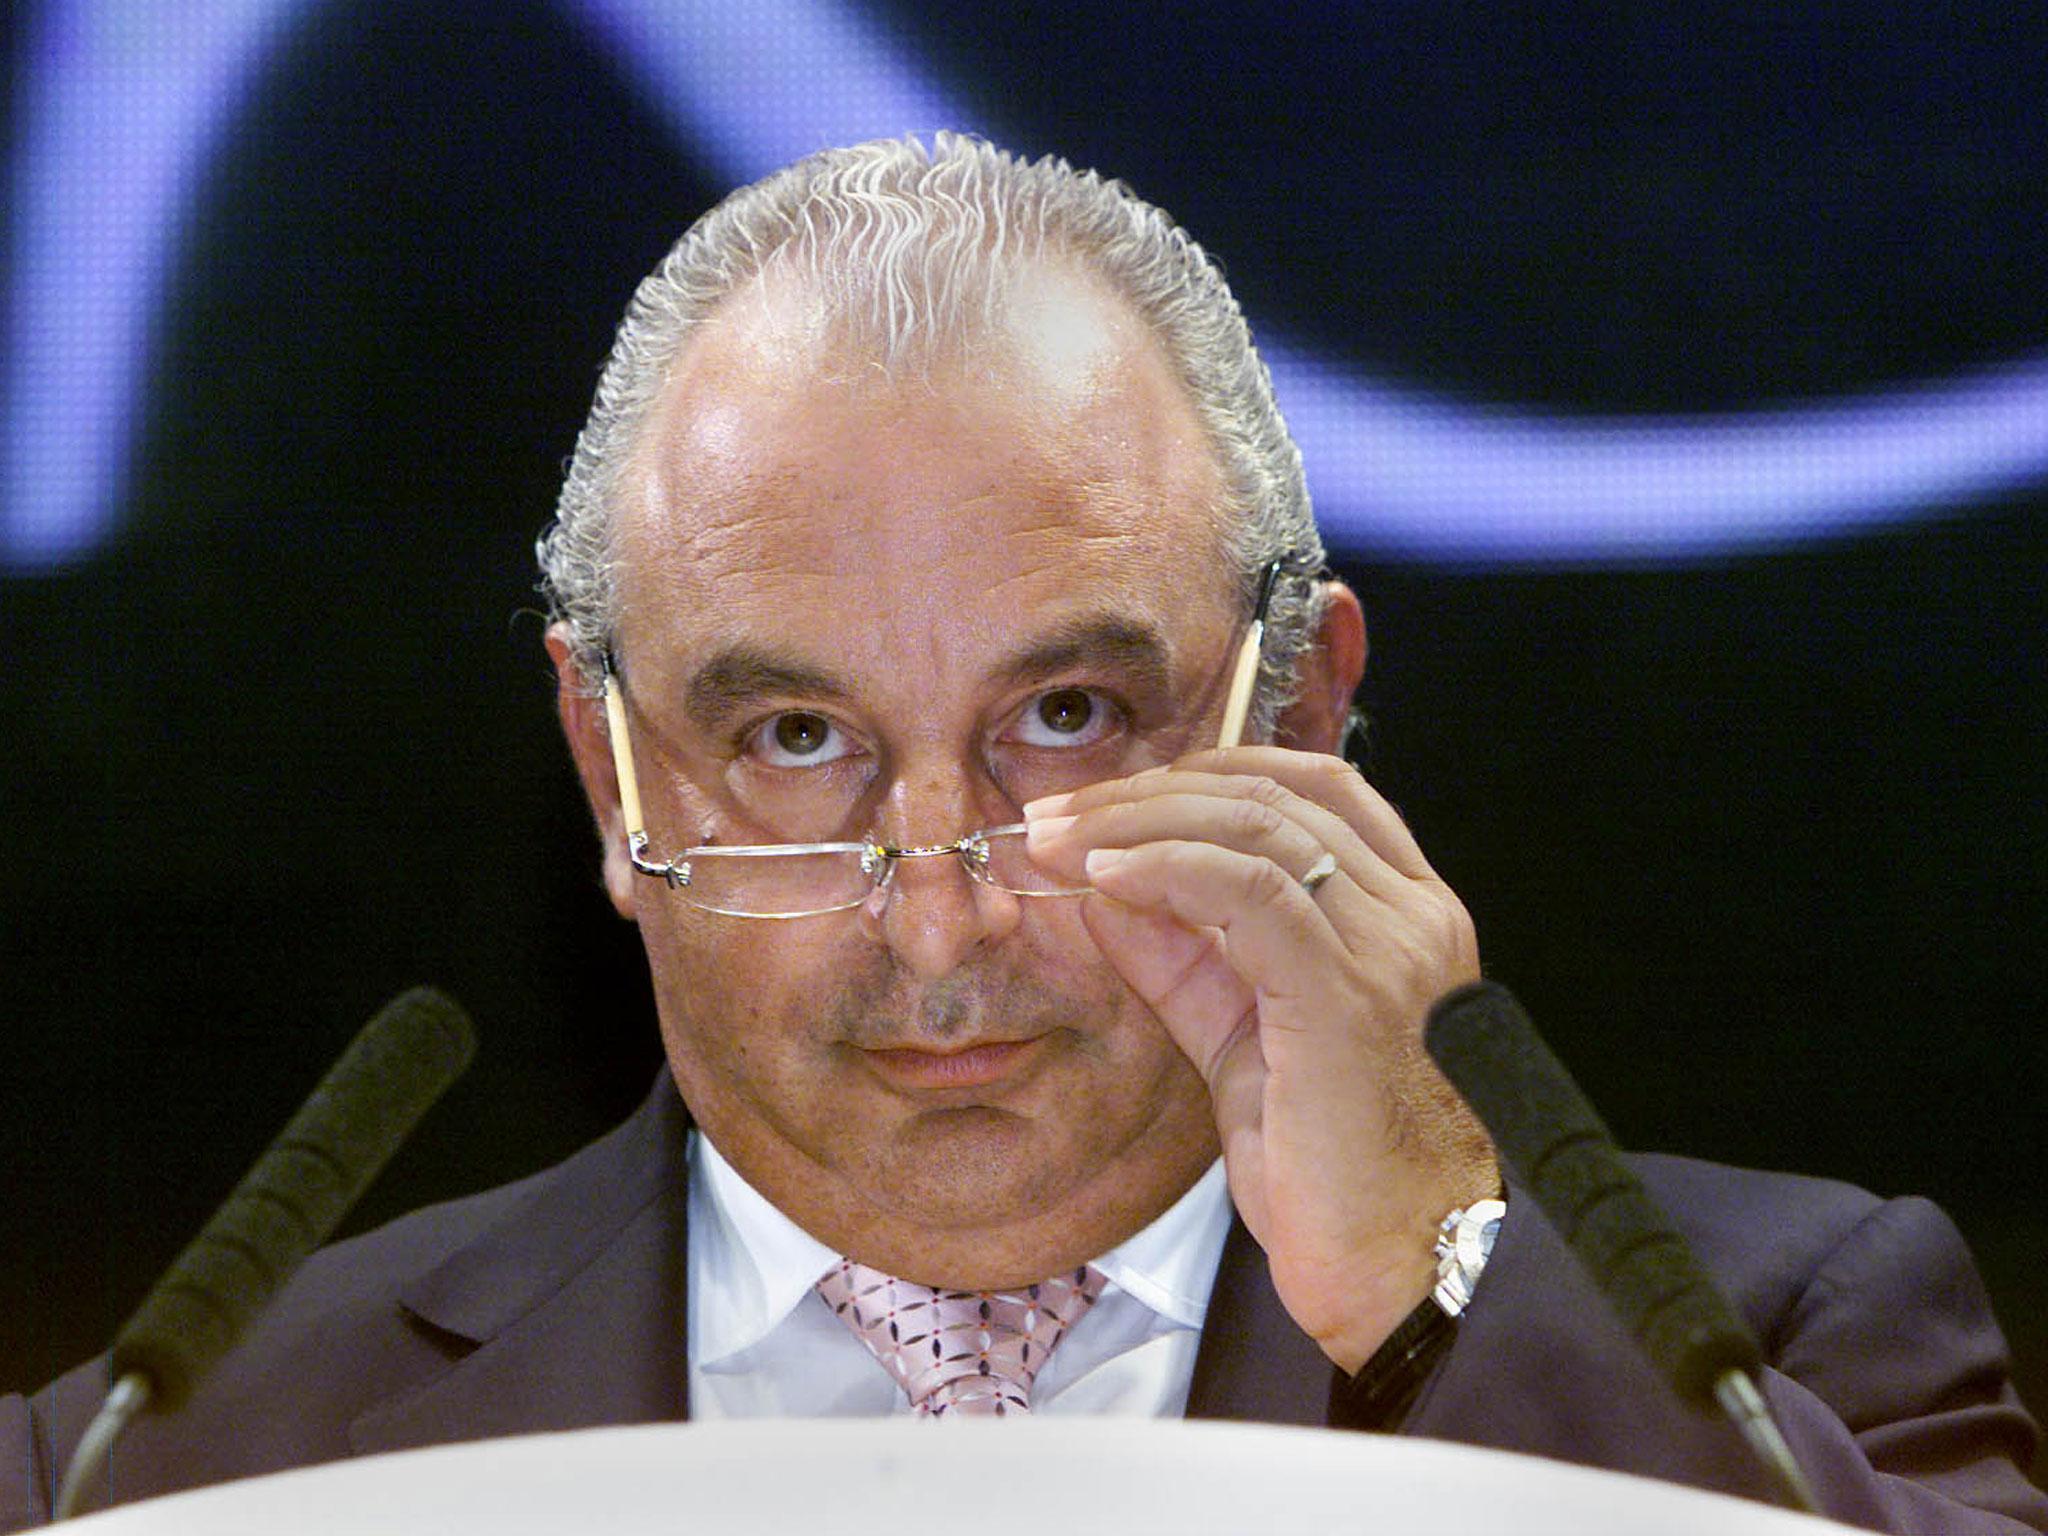 Sir Philip Green took hundreds of millions of pounds out of BHS, making its collapse 'inevitable' MPs have found